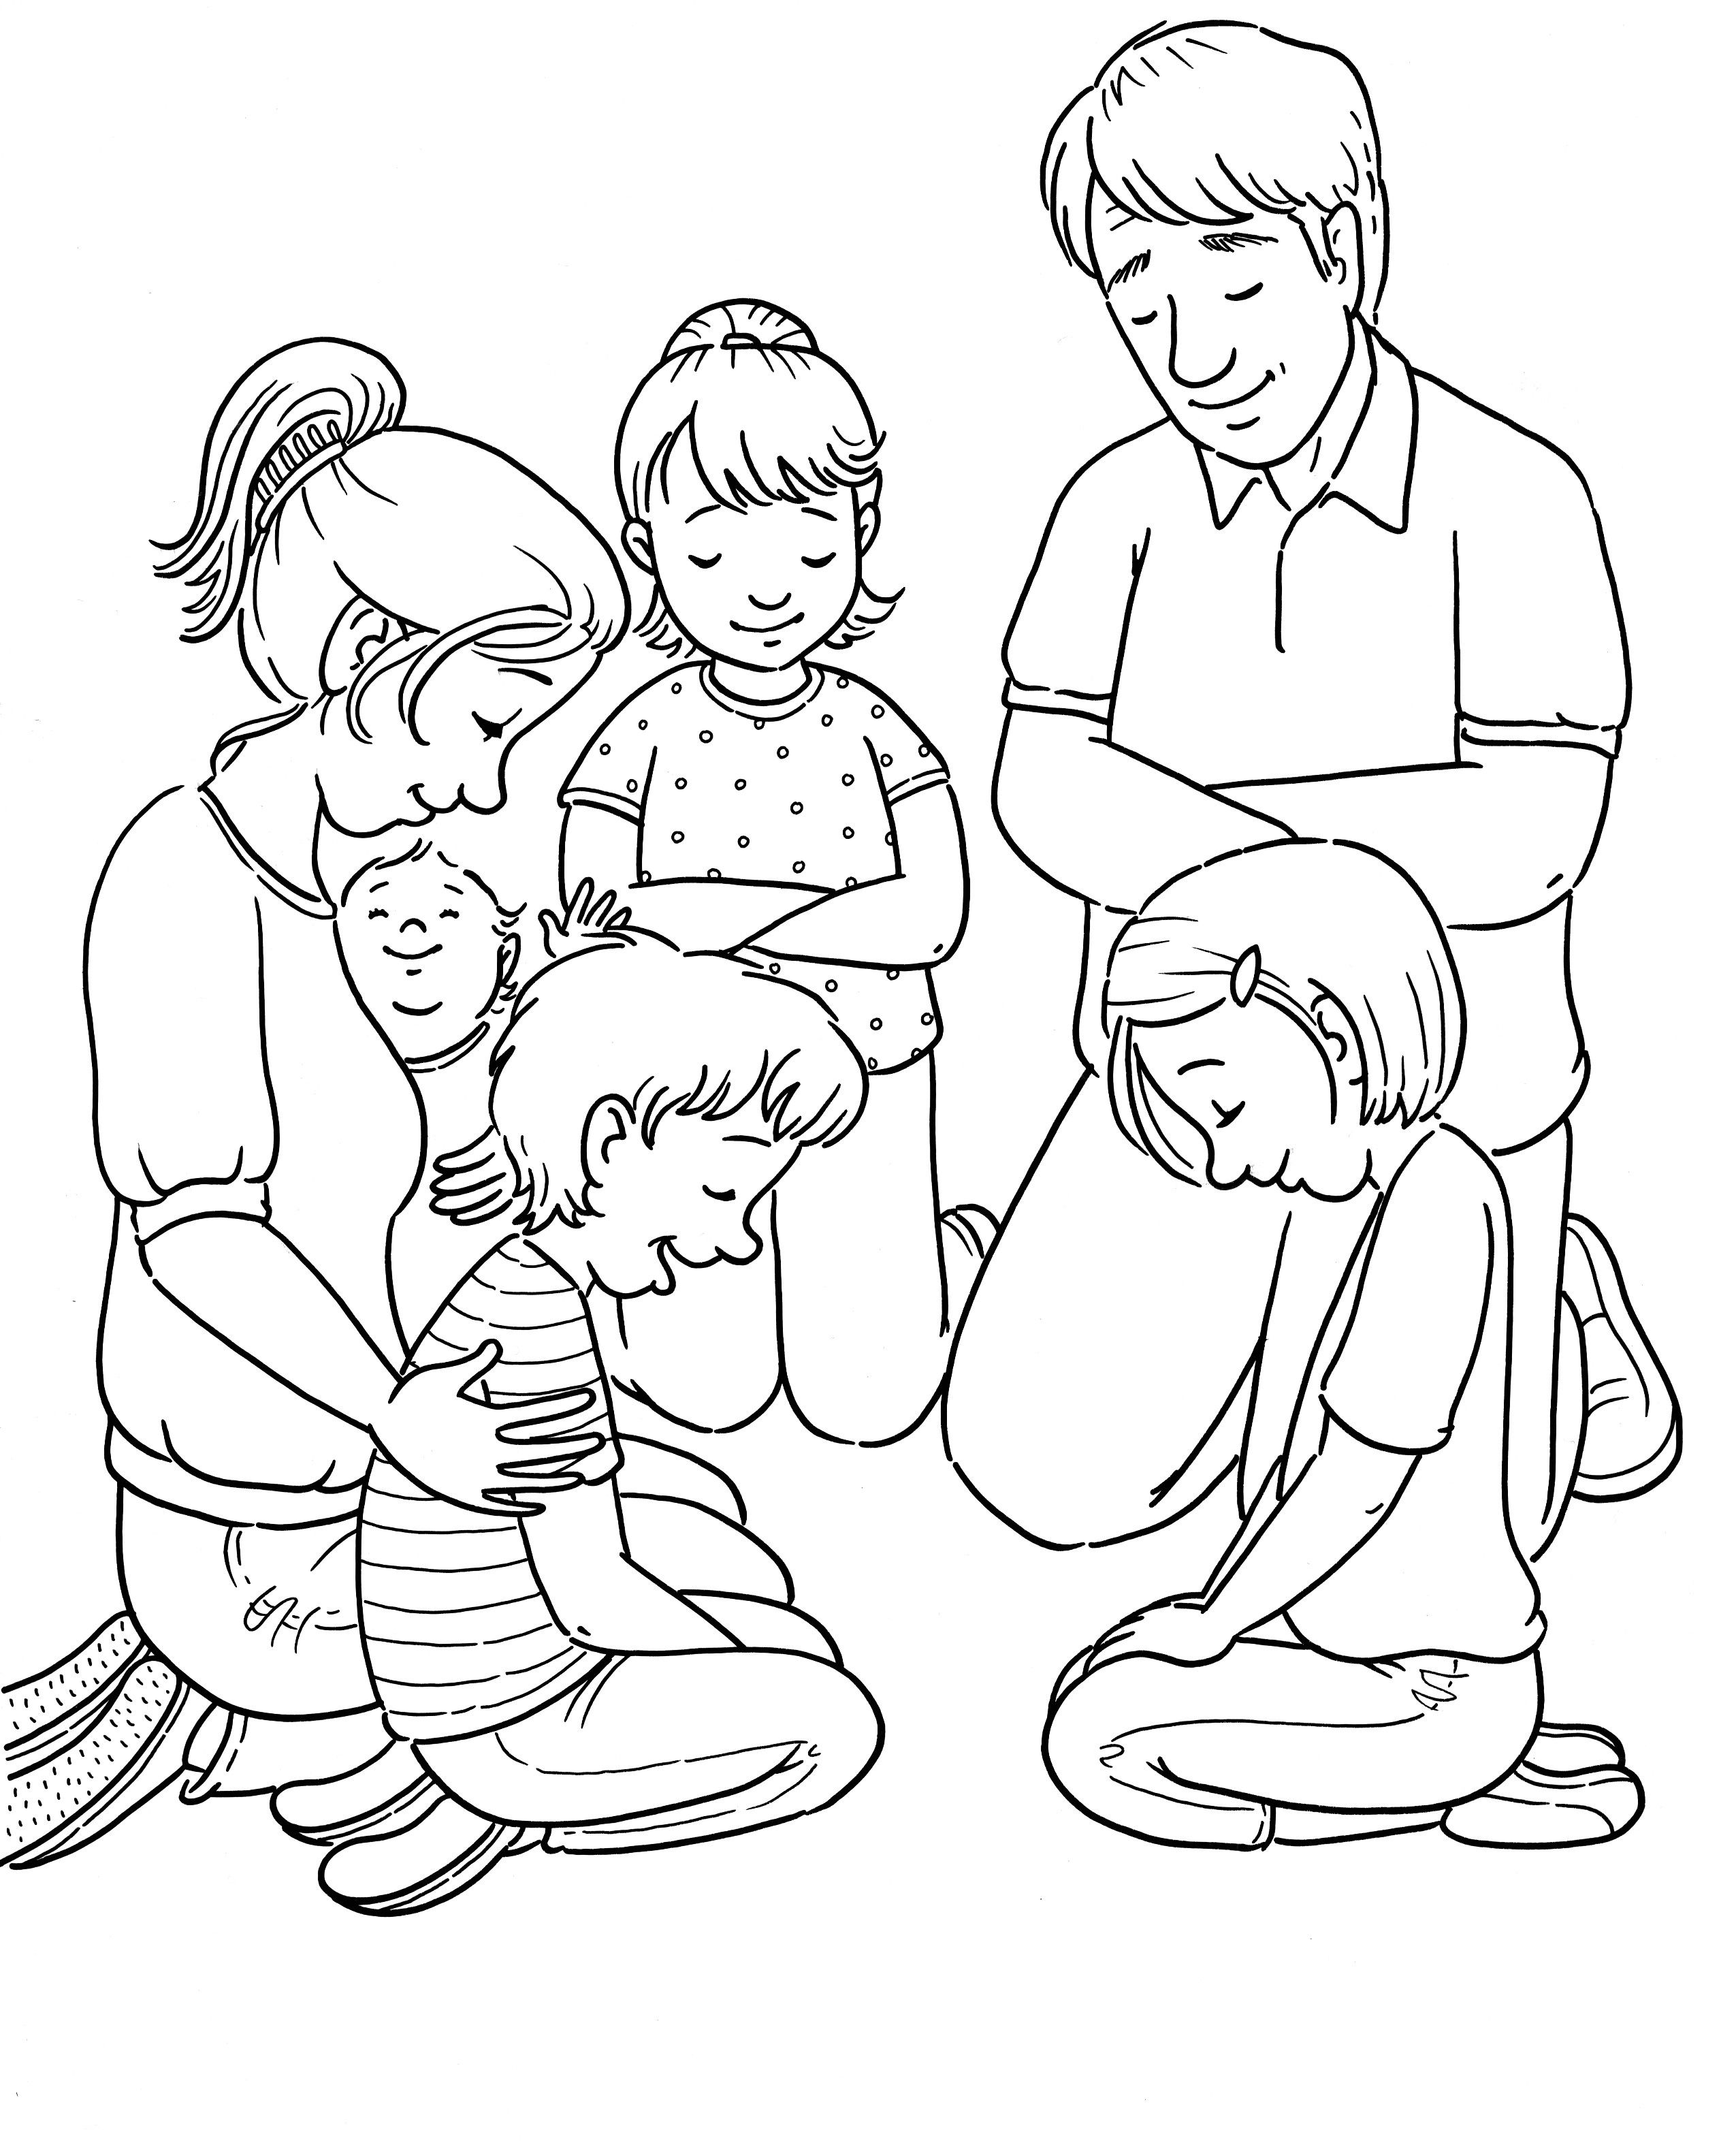 Boy And Girl Praying Coloring Page Lds | Coloring Pages Texture